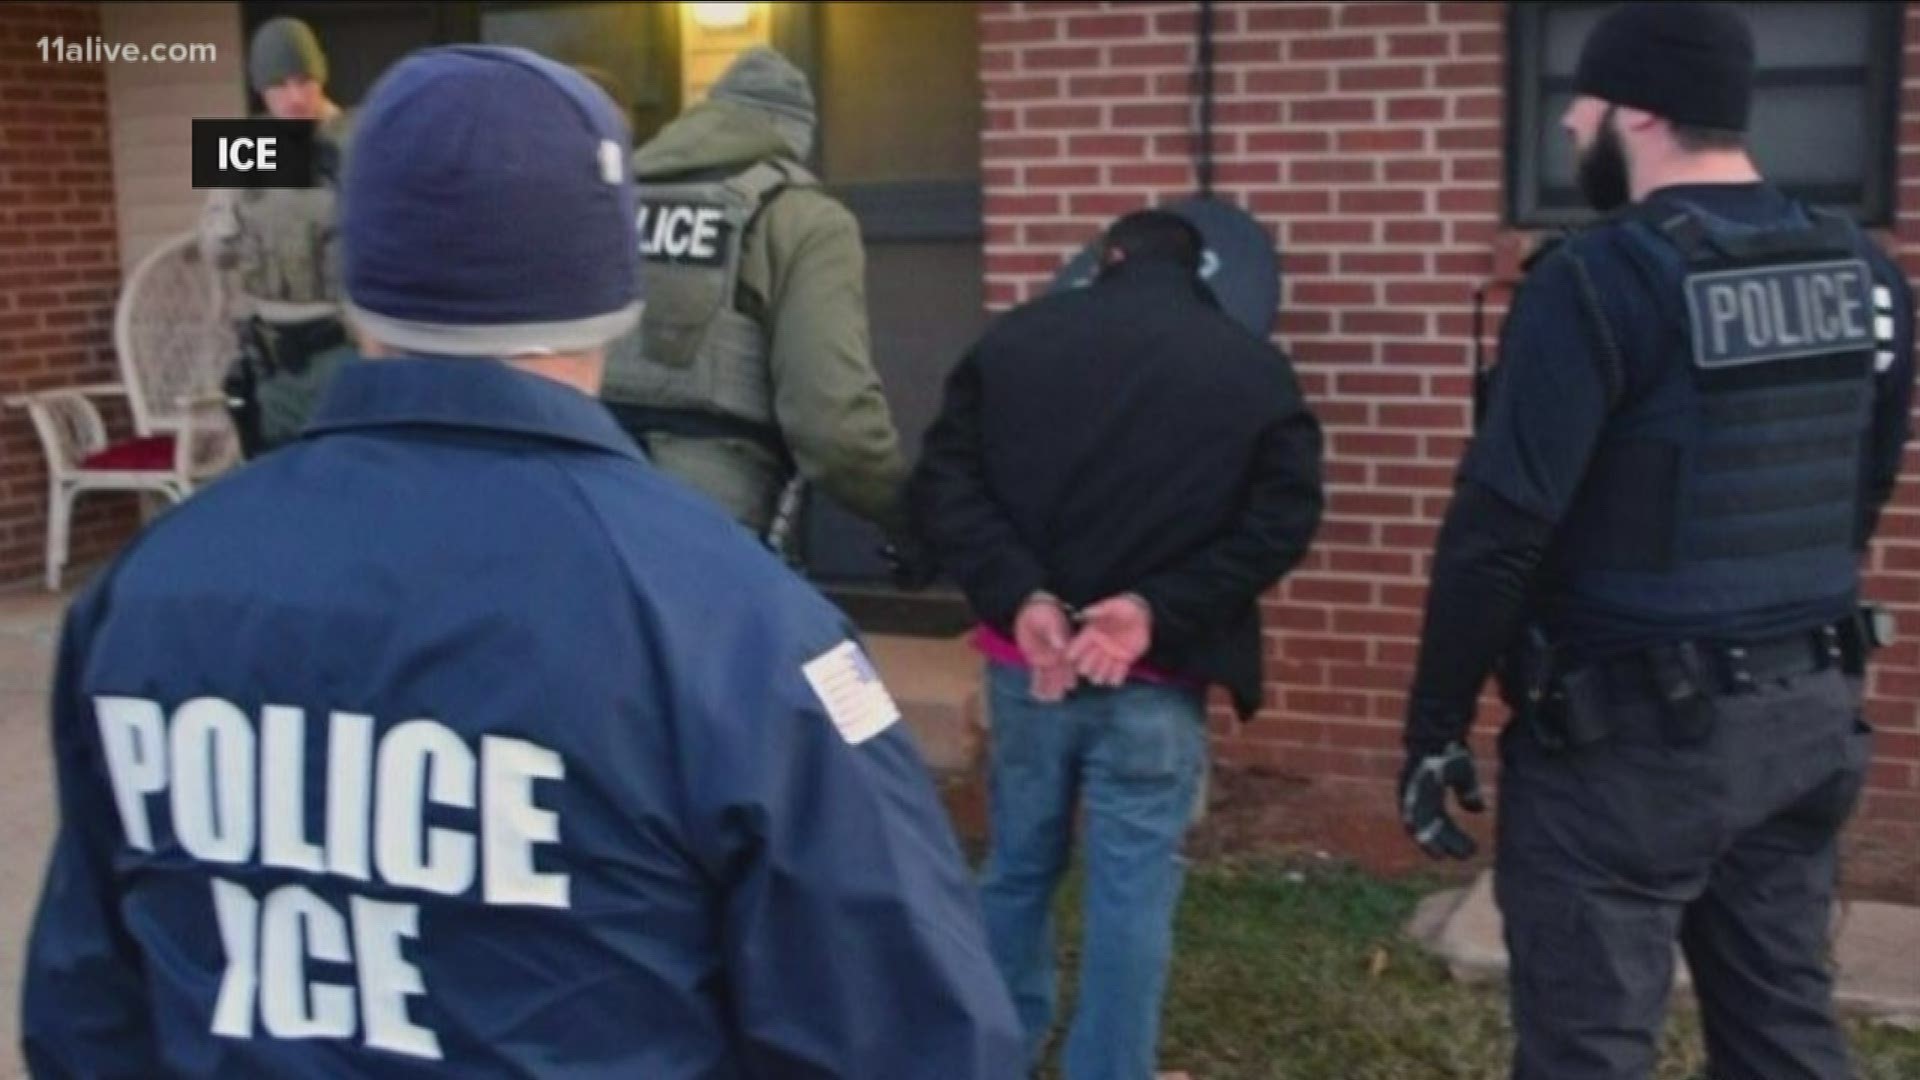 According to the Washington Post, it will likely begin with pre-dawn raids.